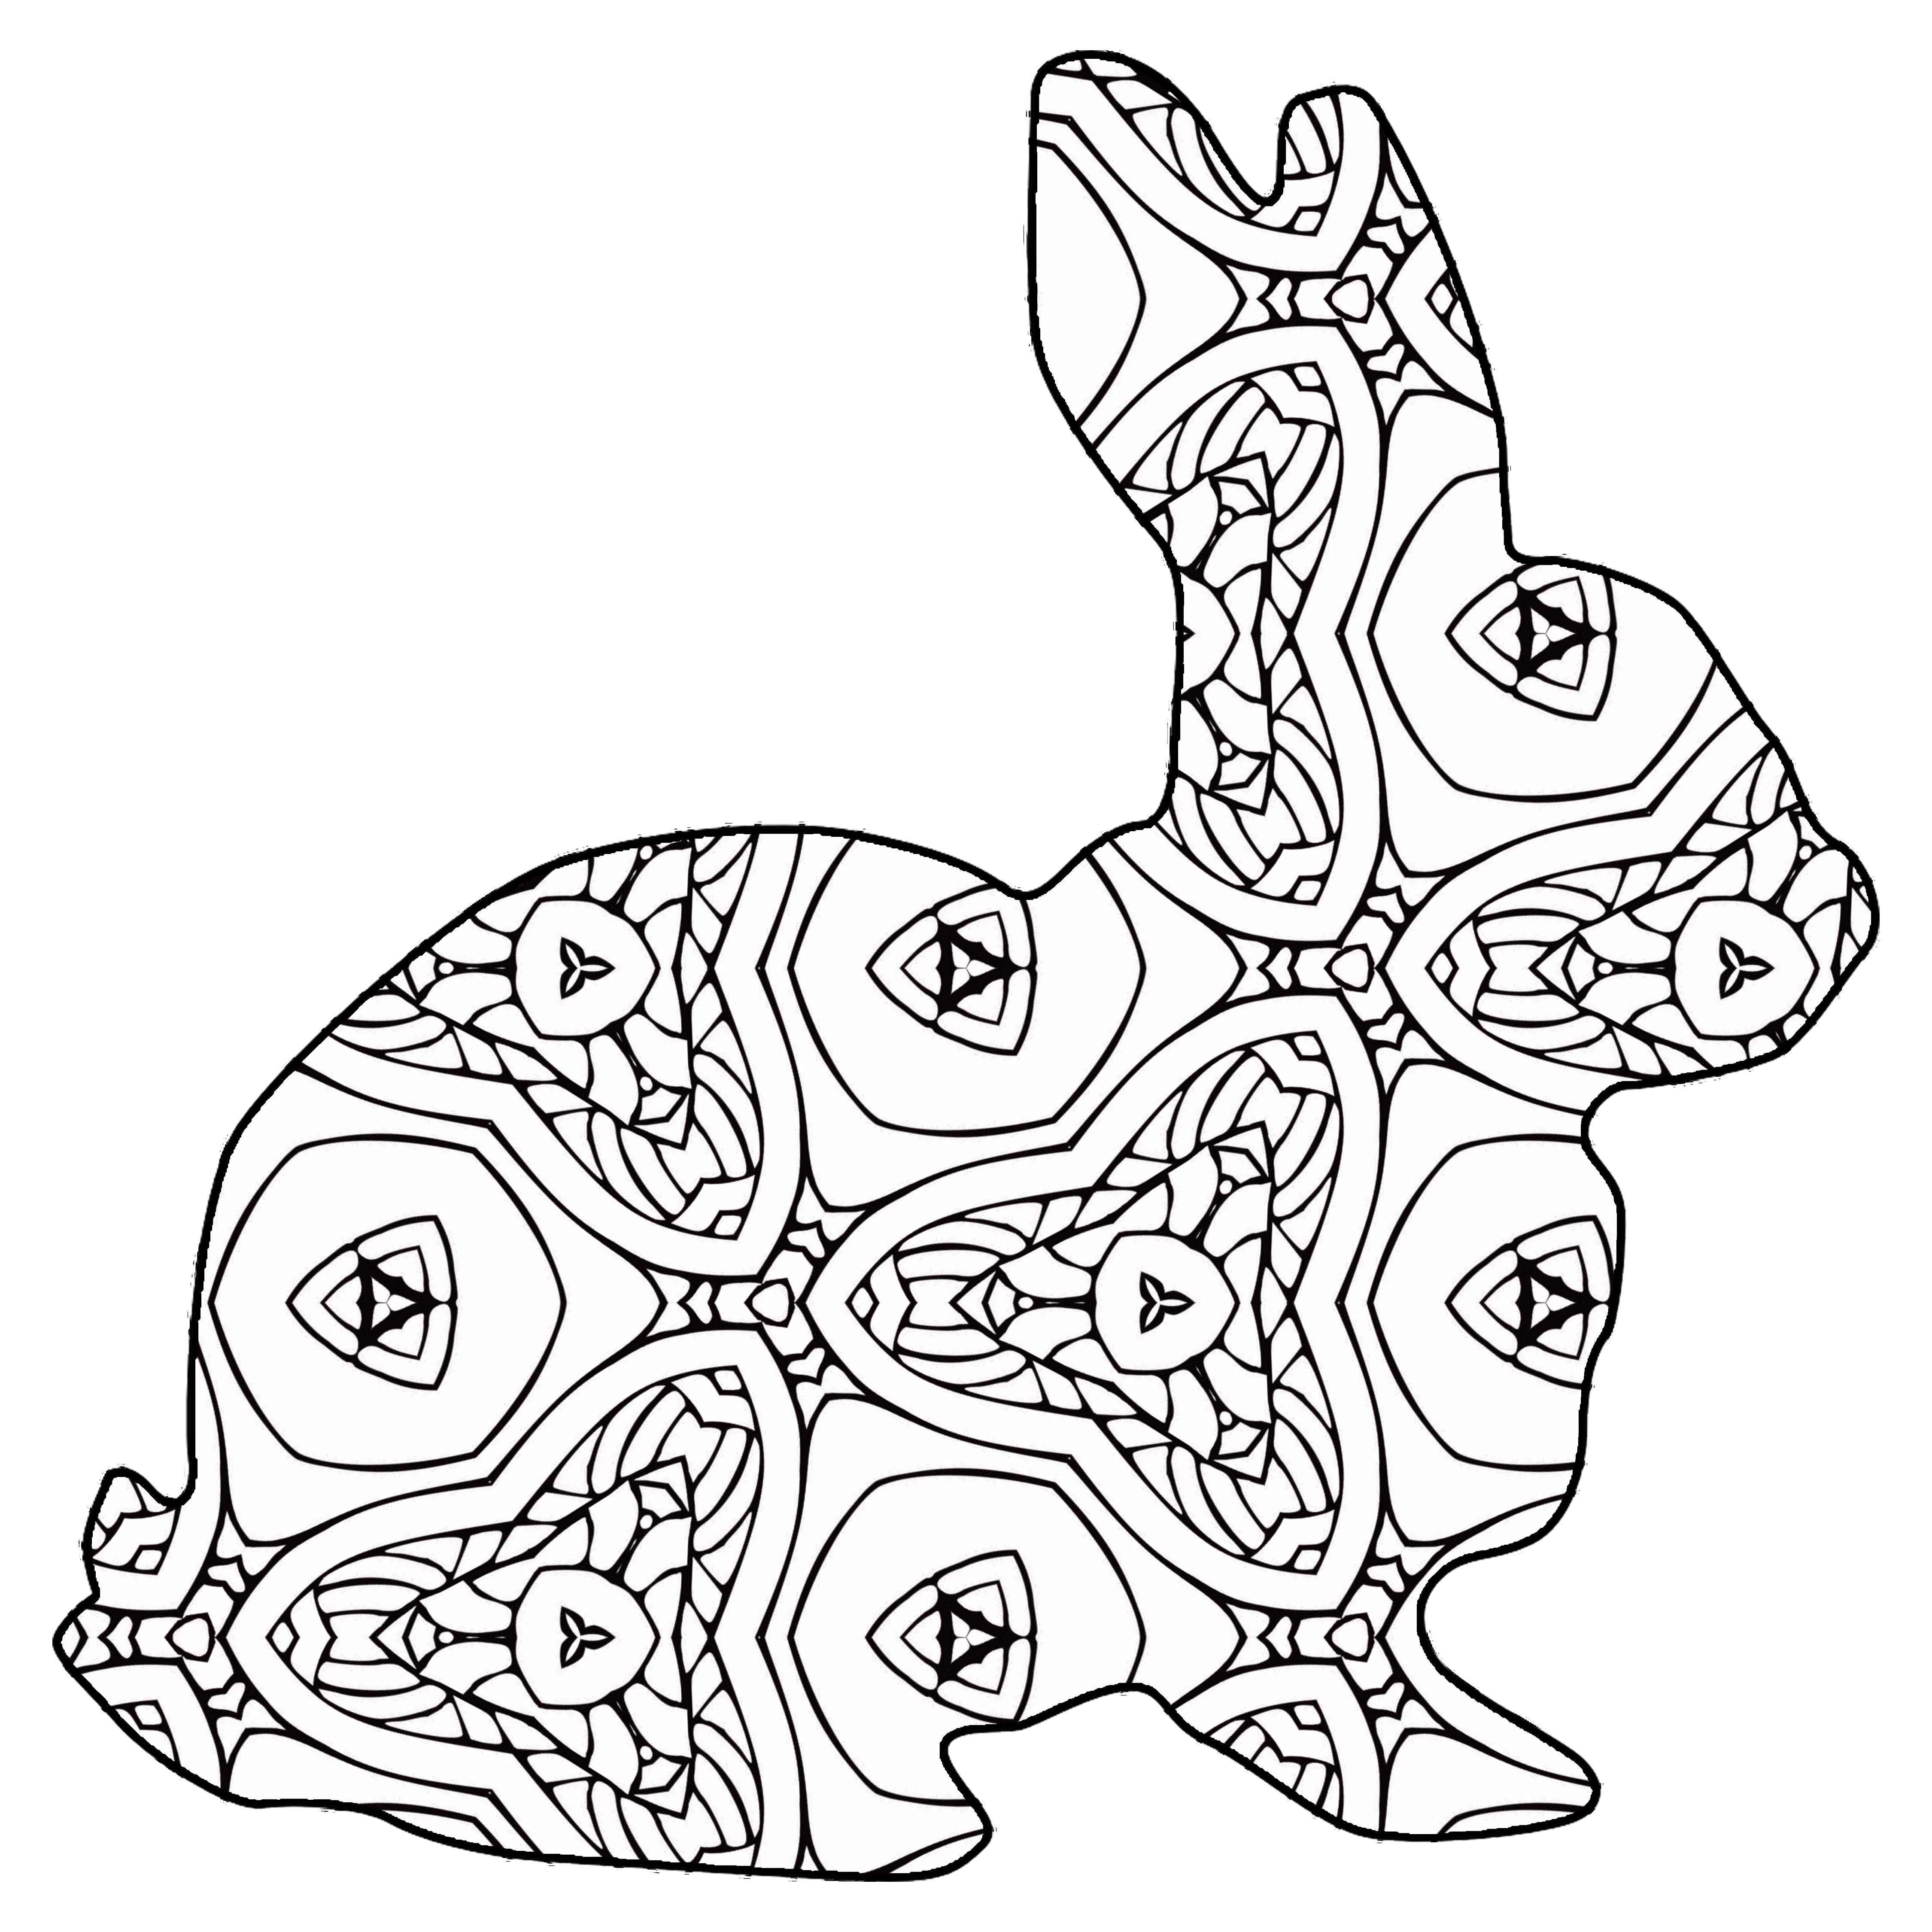 40+ Free Animal Coloring Pages To Print